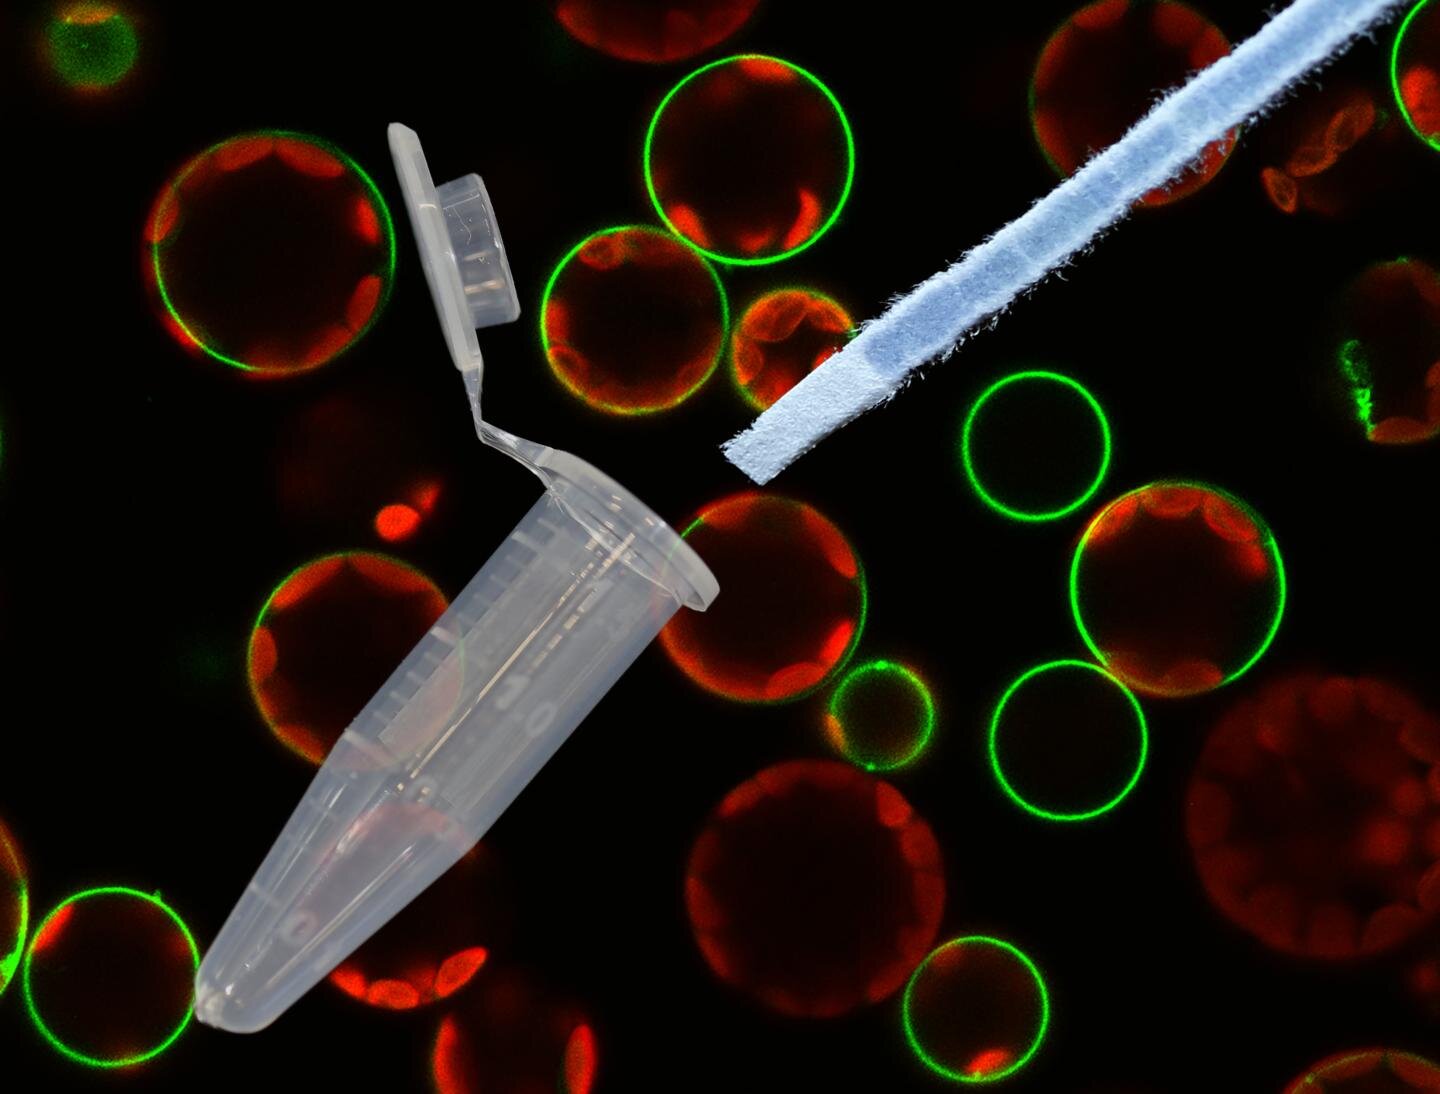 A simple dipstick allows genetic material to be extracted in as little as 30 seconds. Credit: The University of Queensland